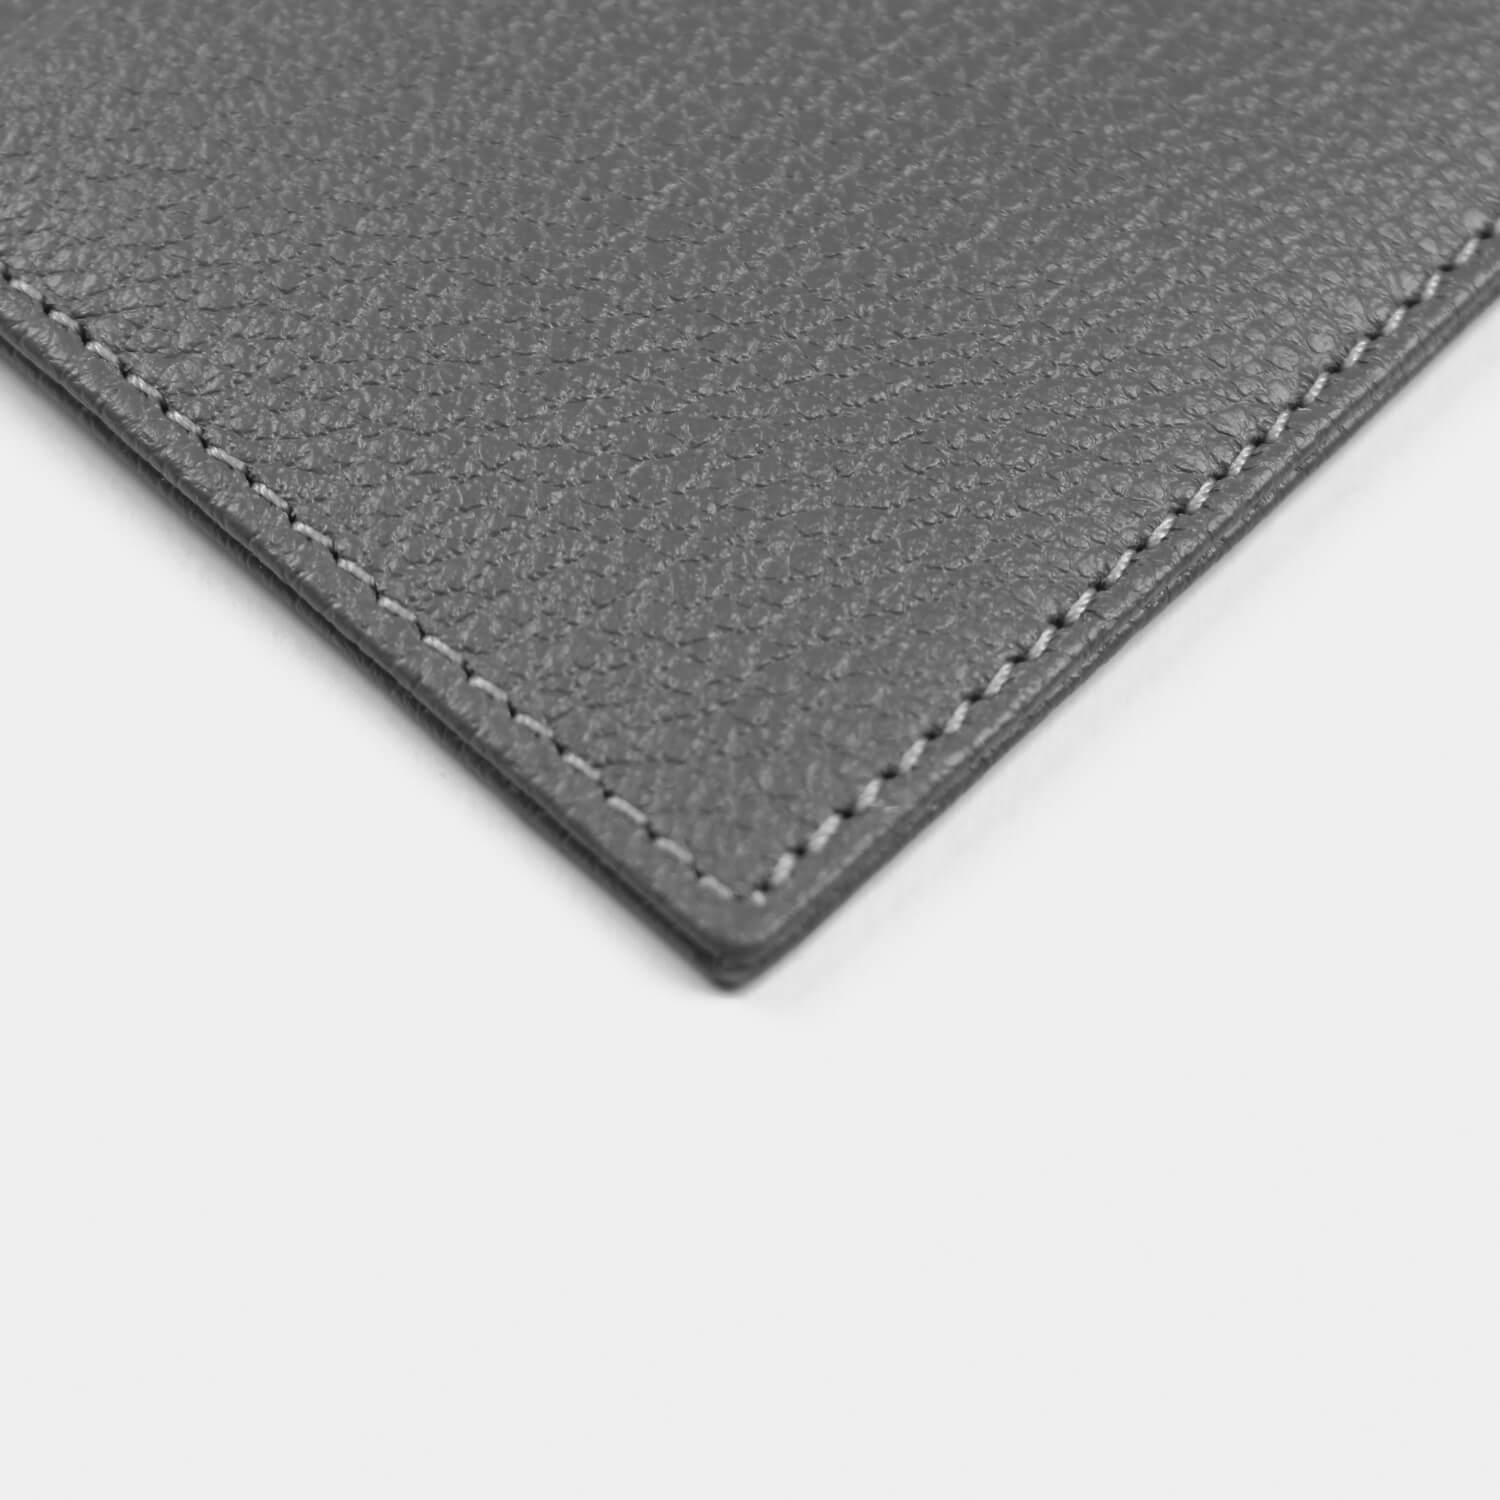 Fine grain leather flat slimline card case for credit cards and business cards, branded with your company logo